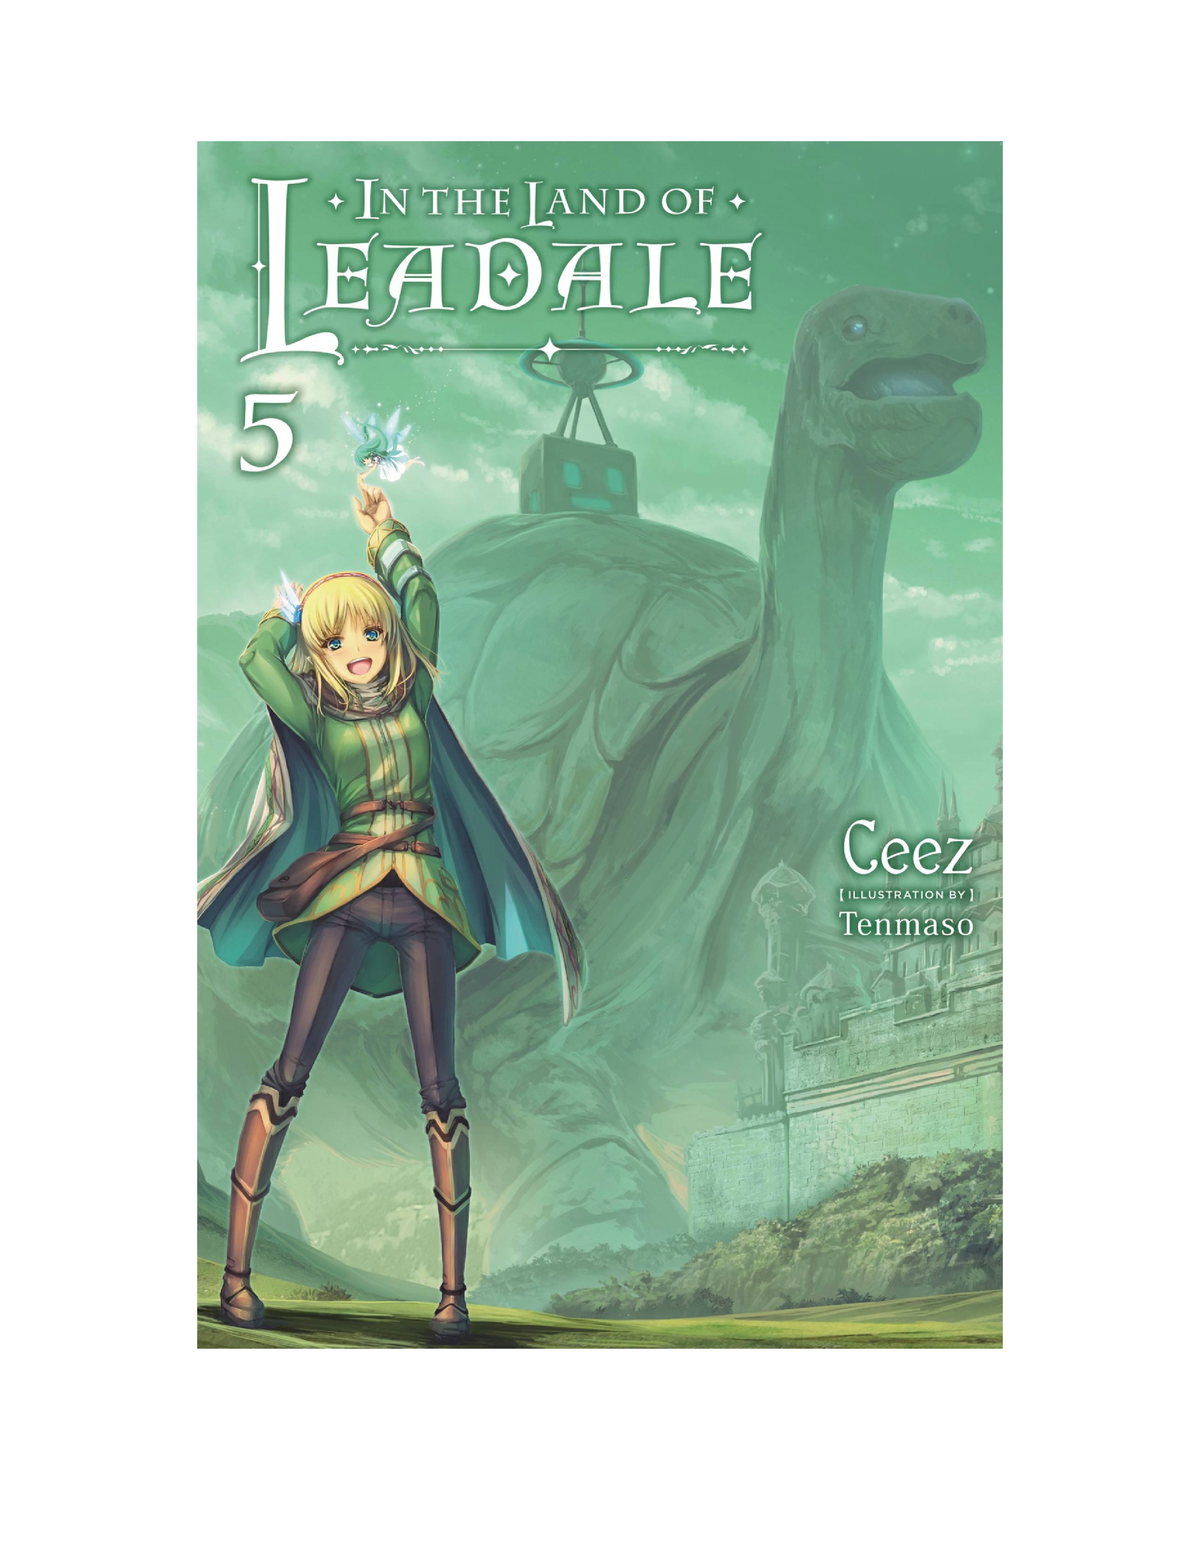 In the Land of Leadale (Leadale no Daichi nite) 4 – Japanese Book Store